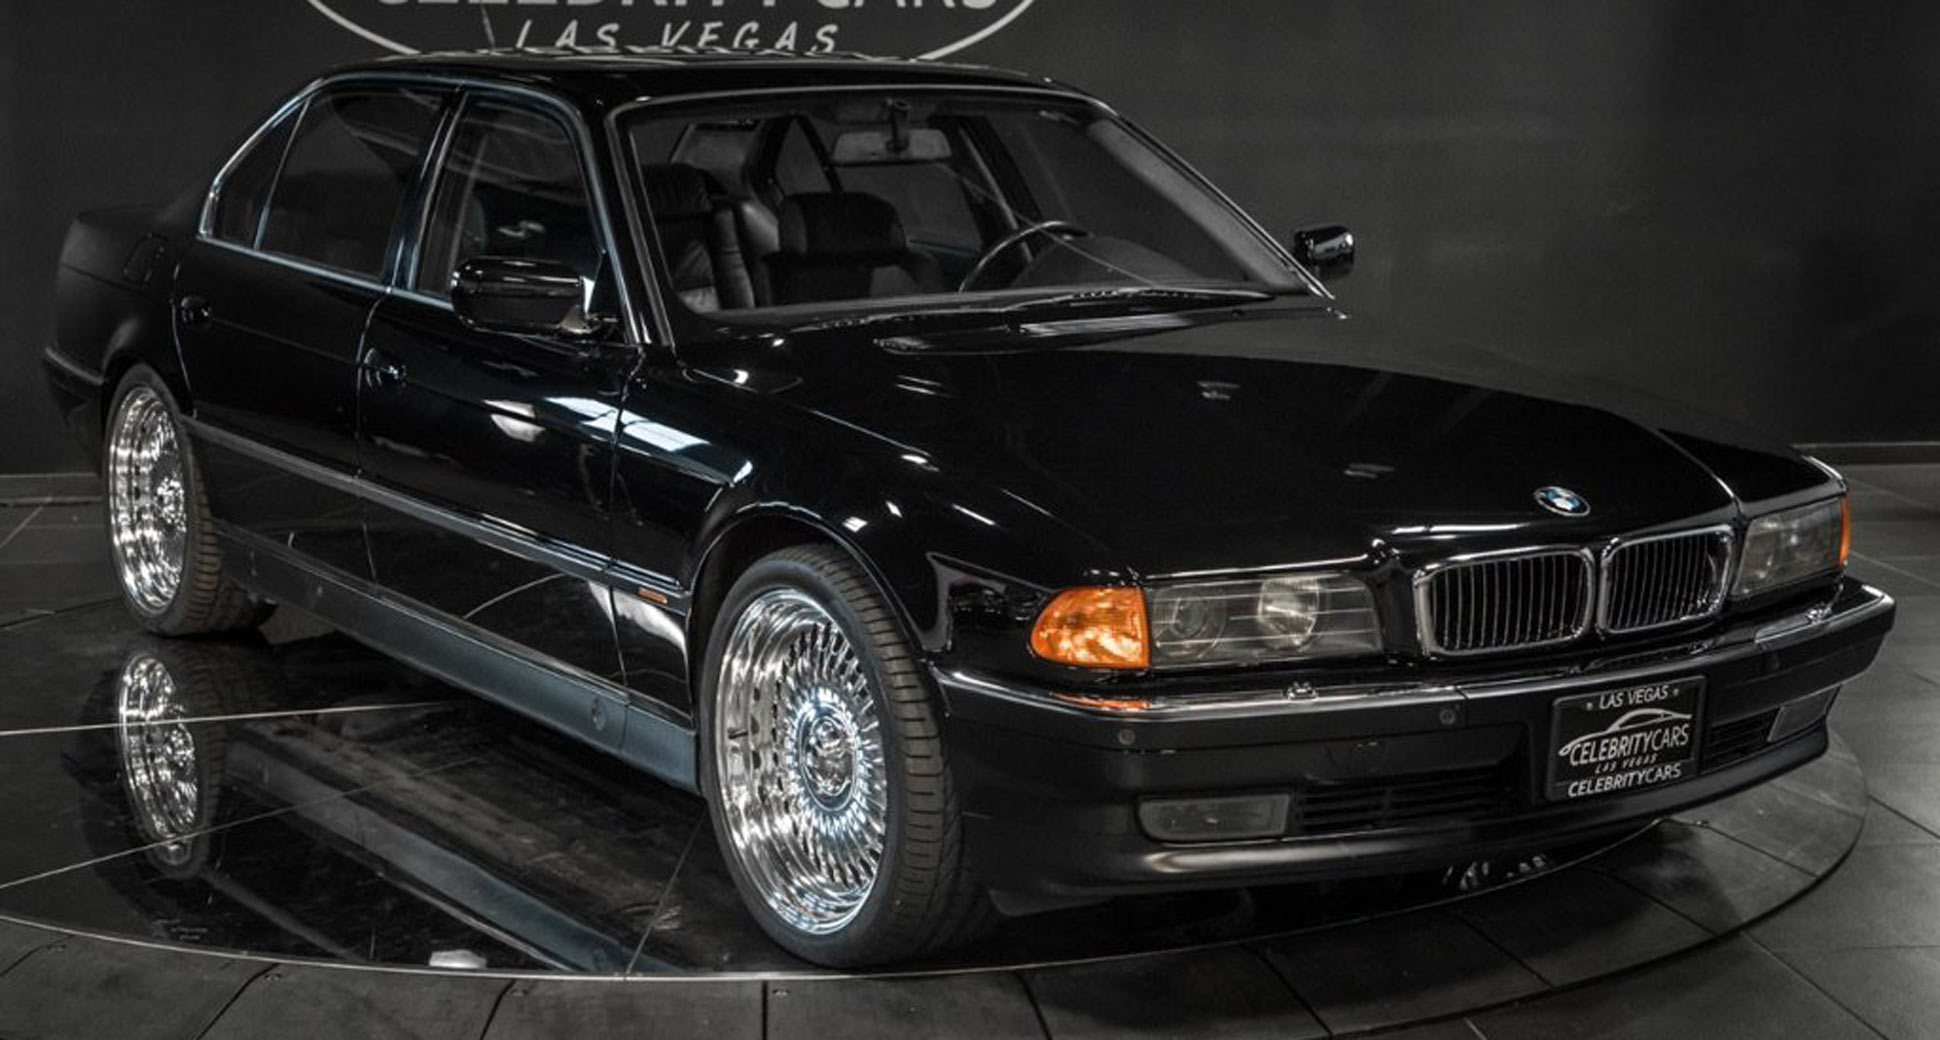 The BMW 750iL That Tupac Was Shot Still Available For Sale, Only Now It  Costs $1.75 Million | Carscoops